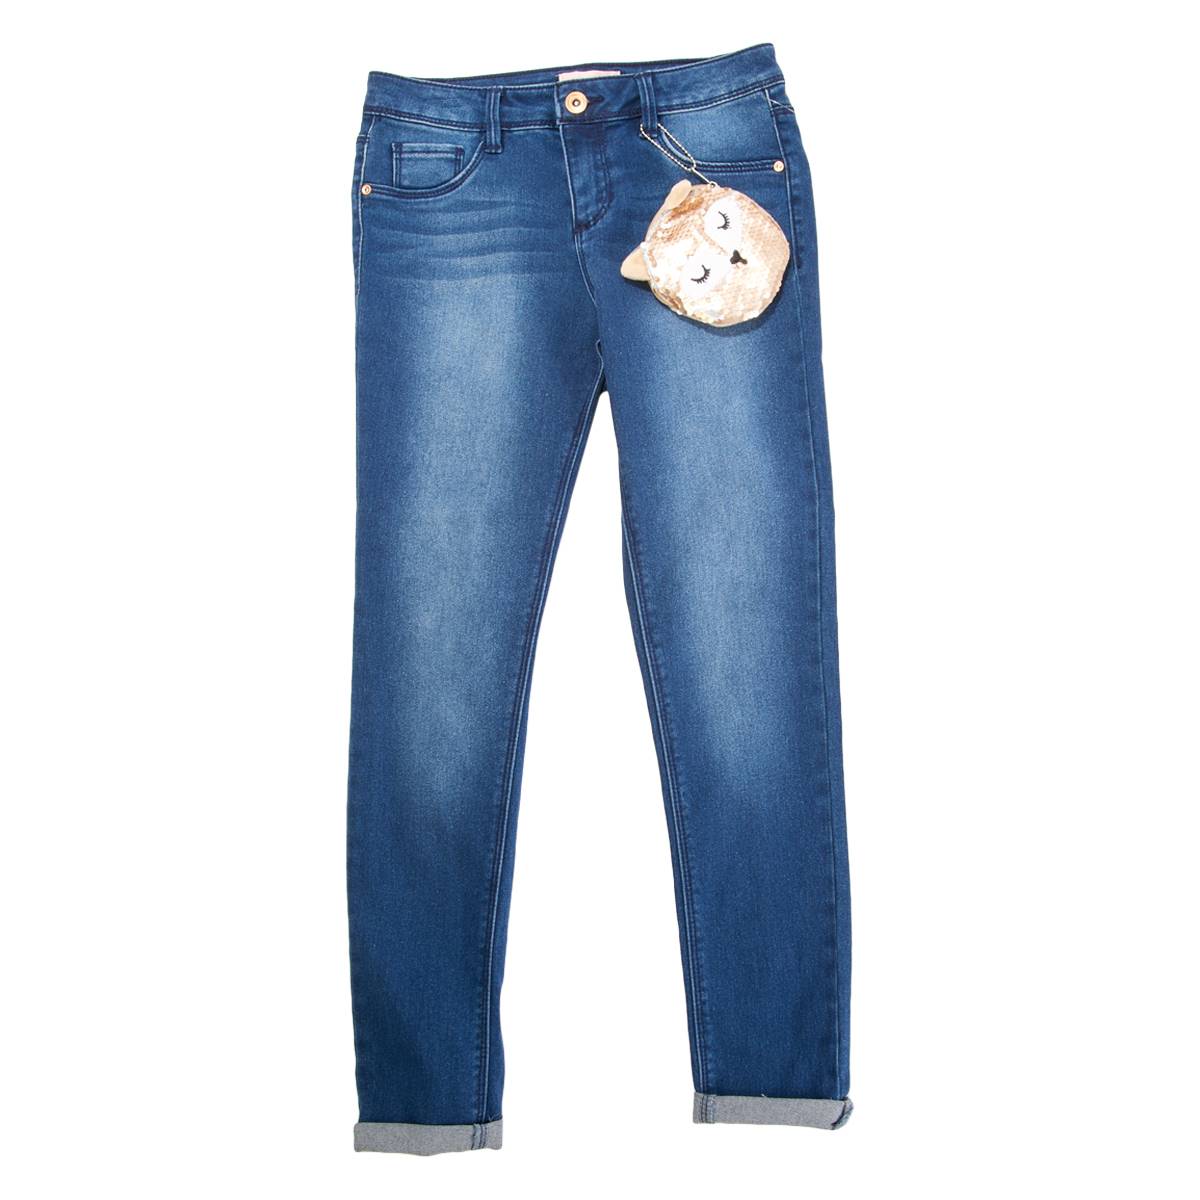 Girls (7-12) Squeeze Roll Cuff Basic Jeans